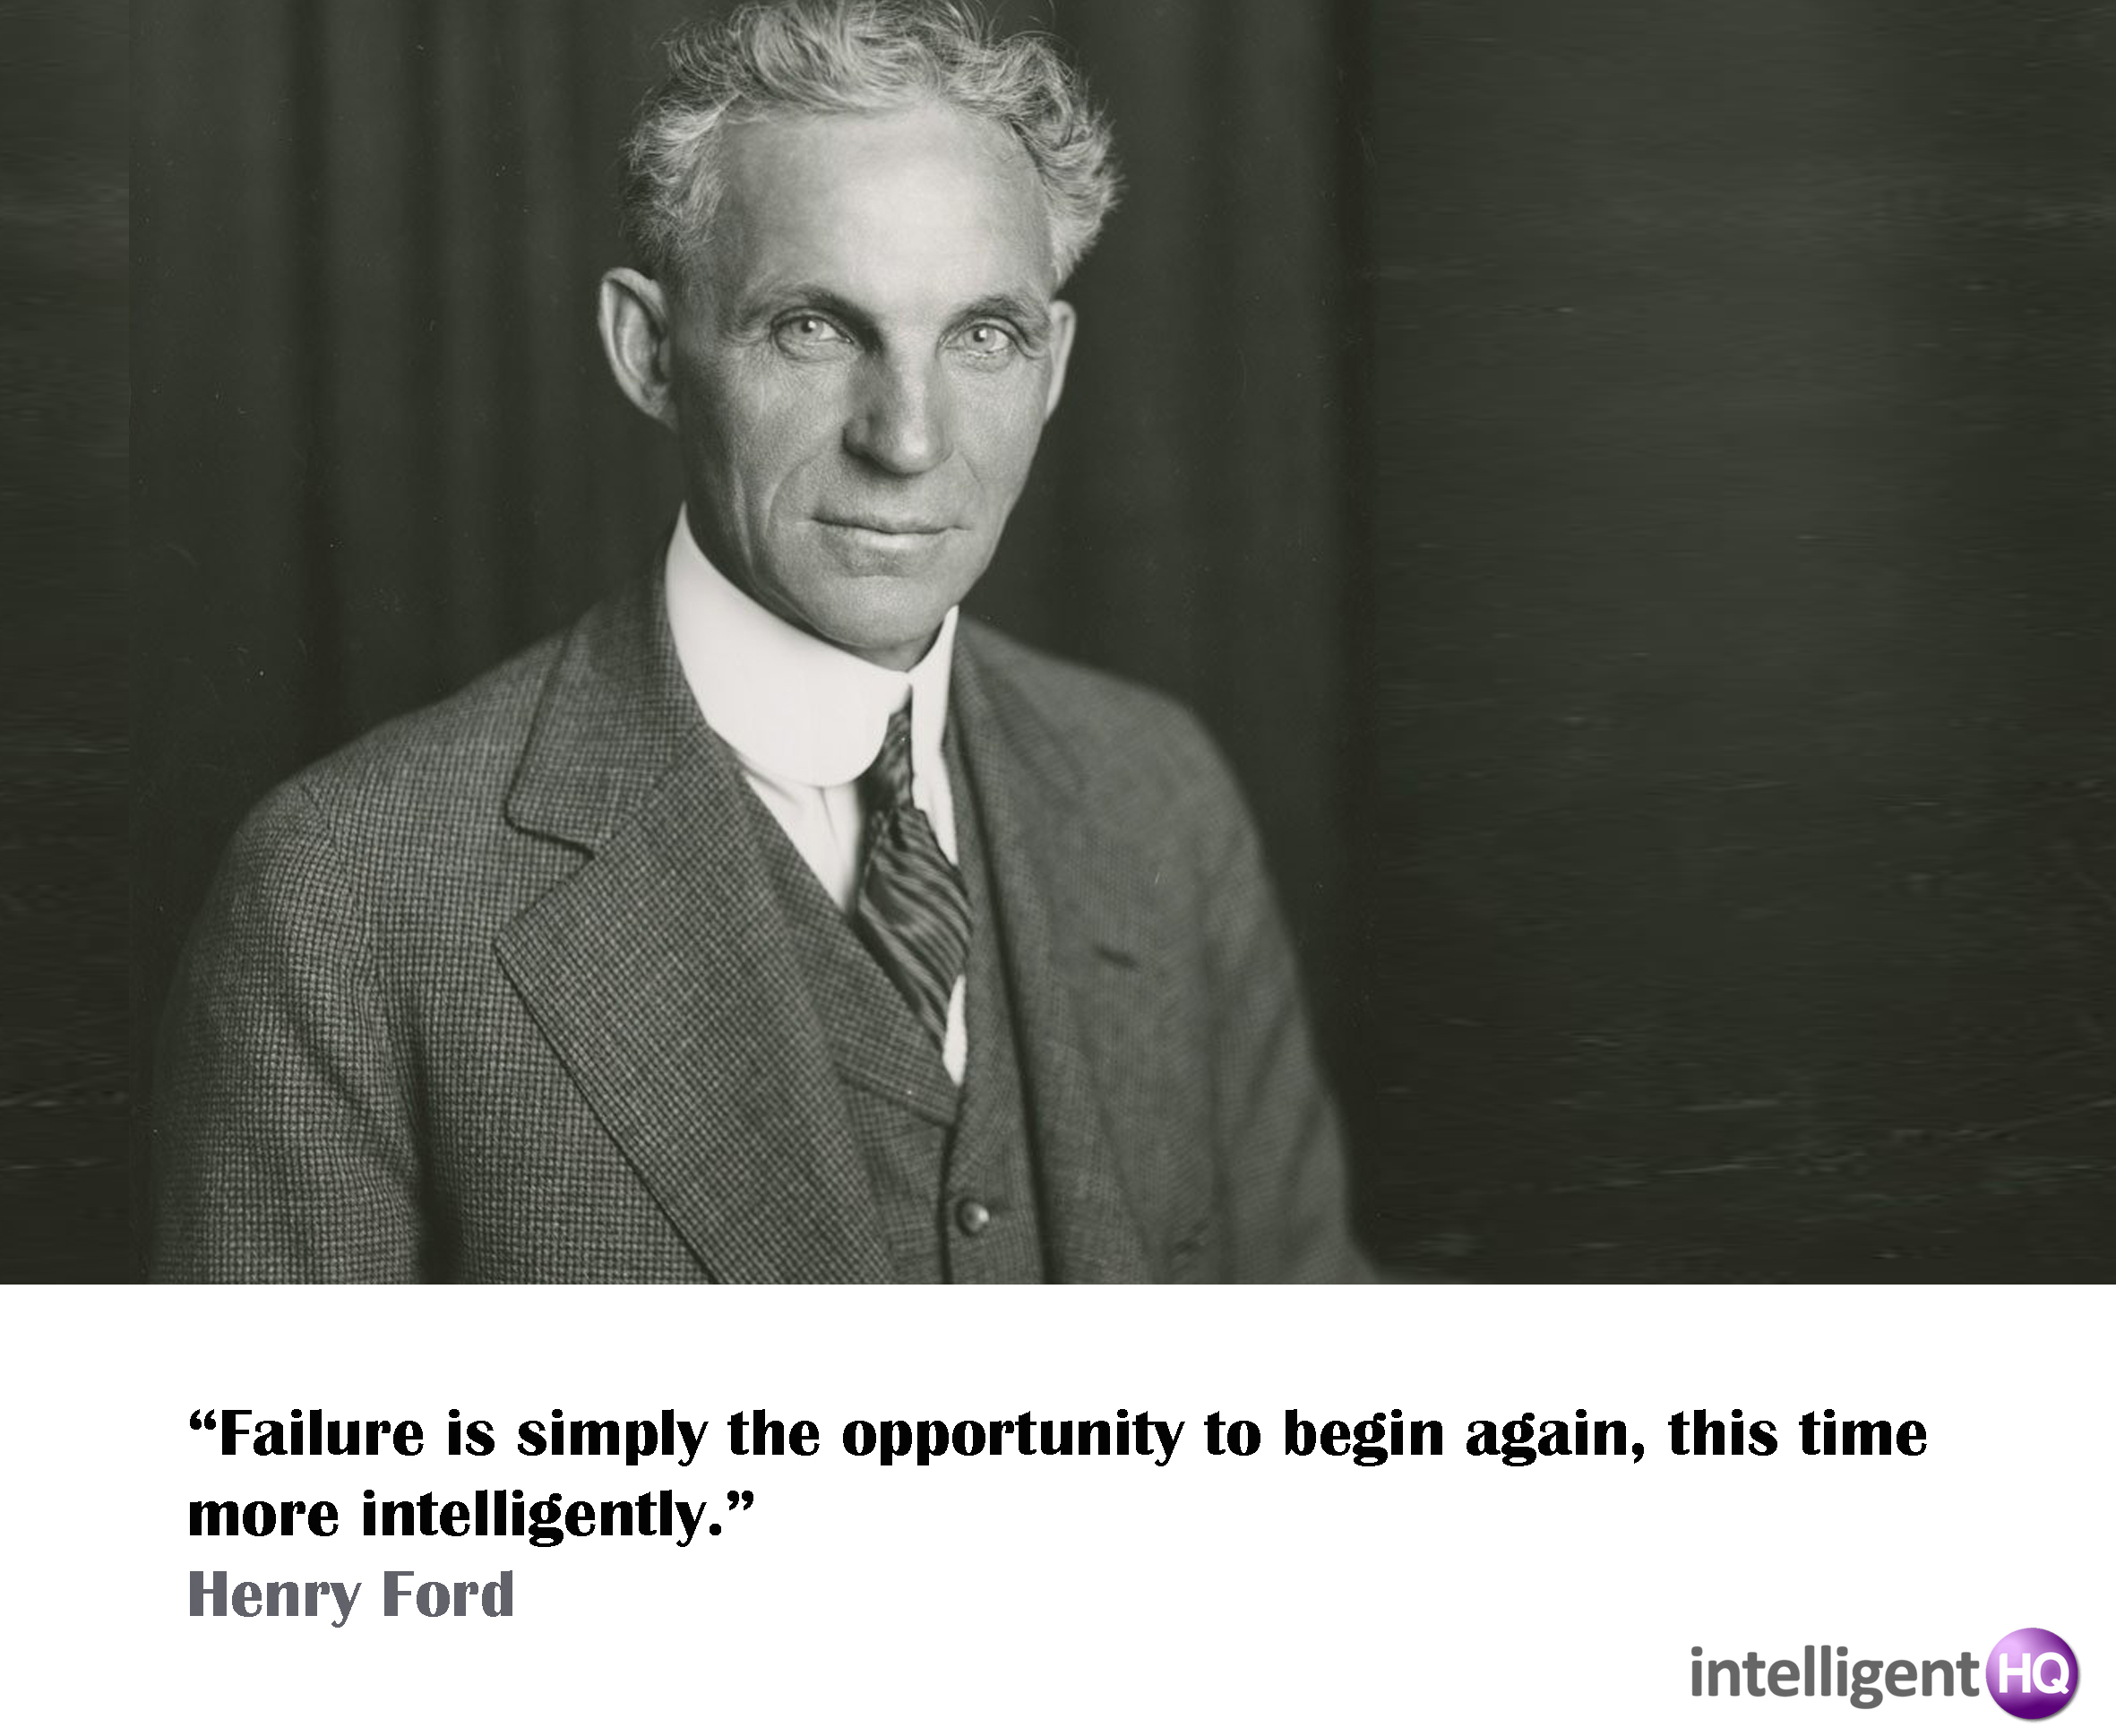 henry ford napoleon hill never met